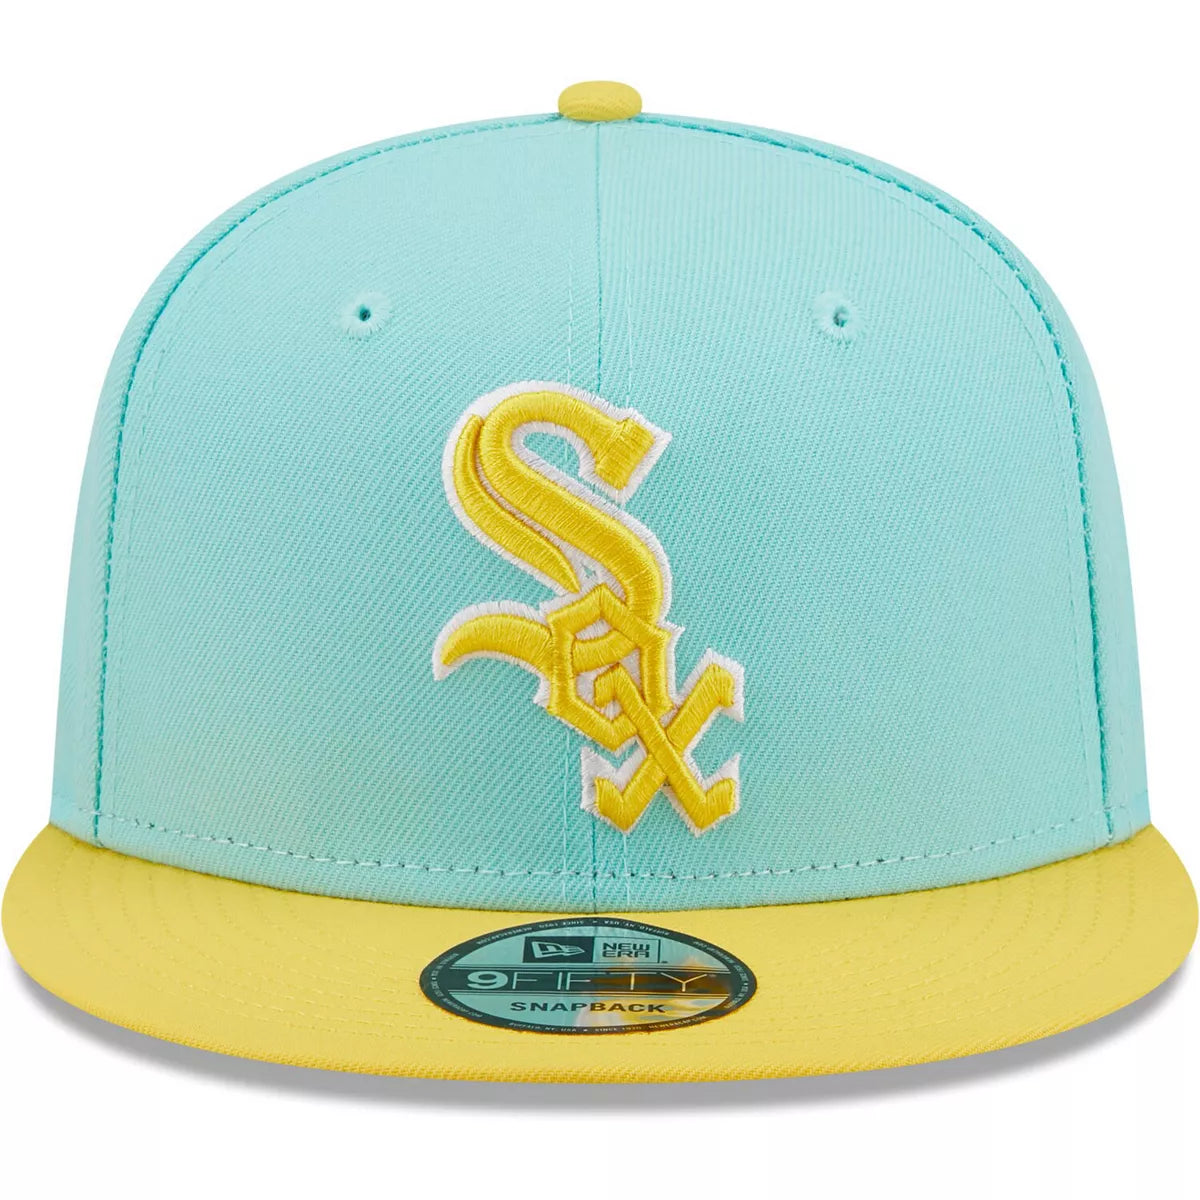 Chicago White Sox New Era Color Pack 9FIFTY SnapBack - Turquoise/Yellow